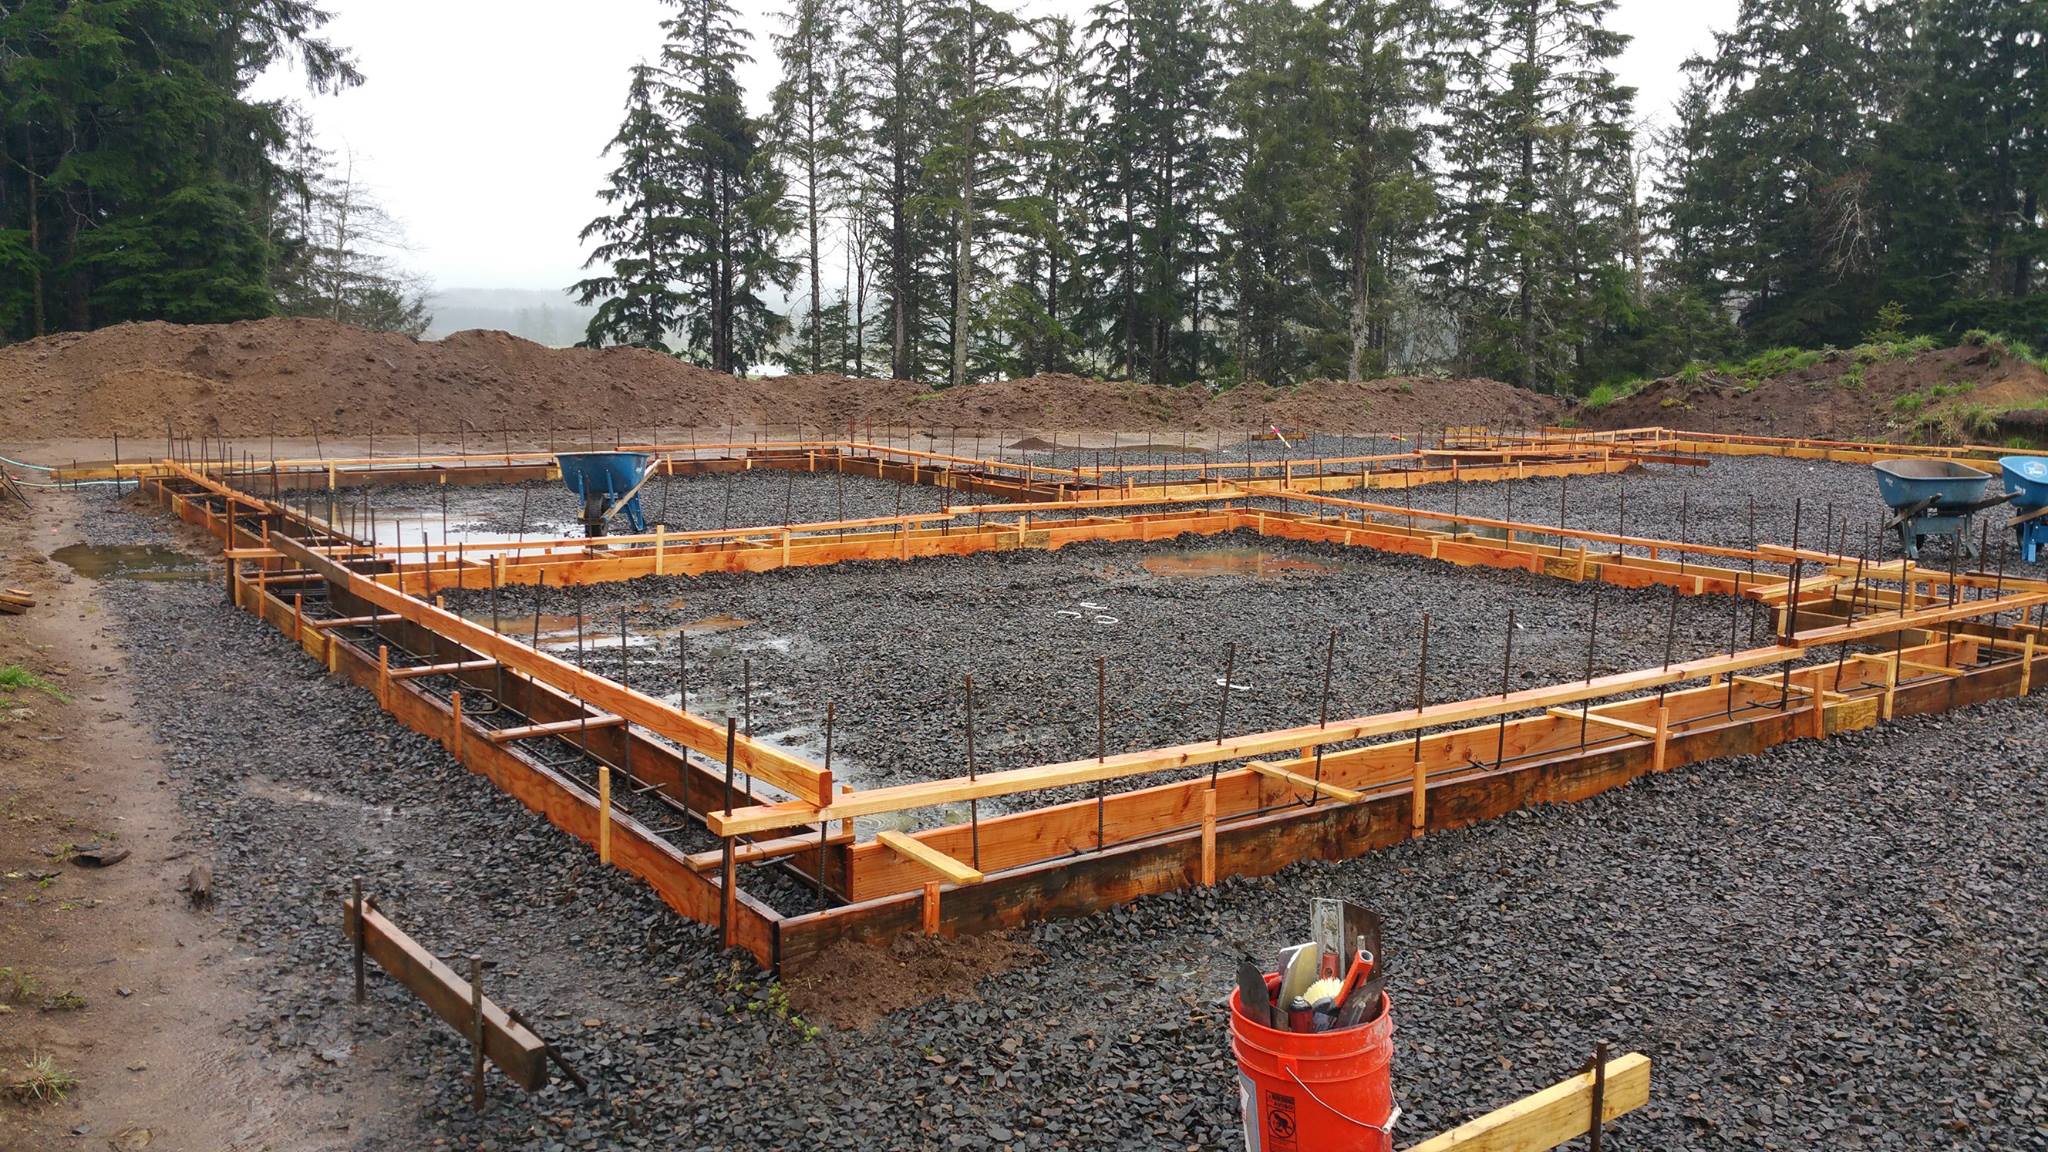 Foundation forms being set for the footings